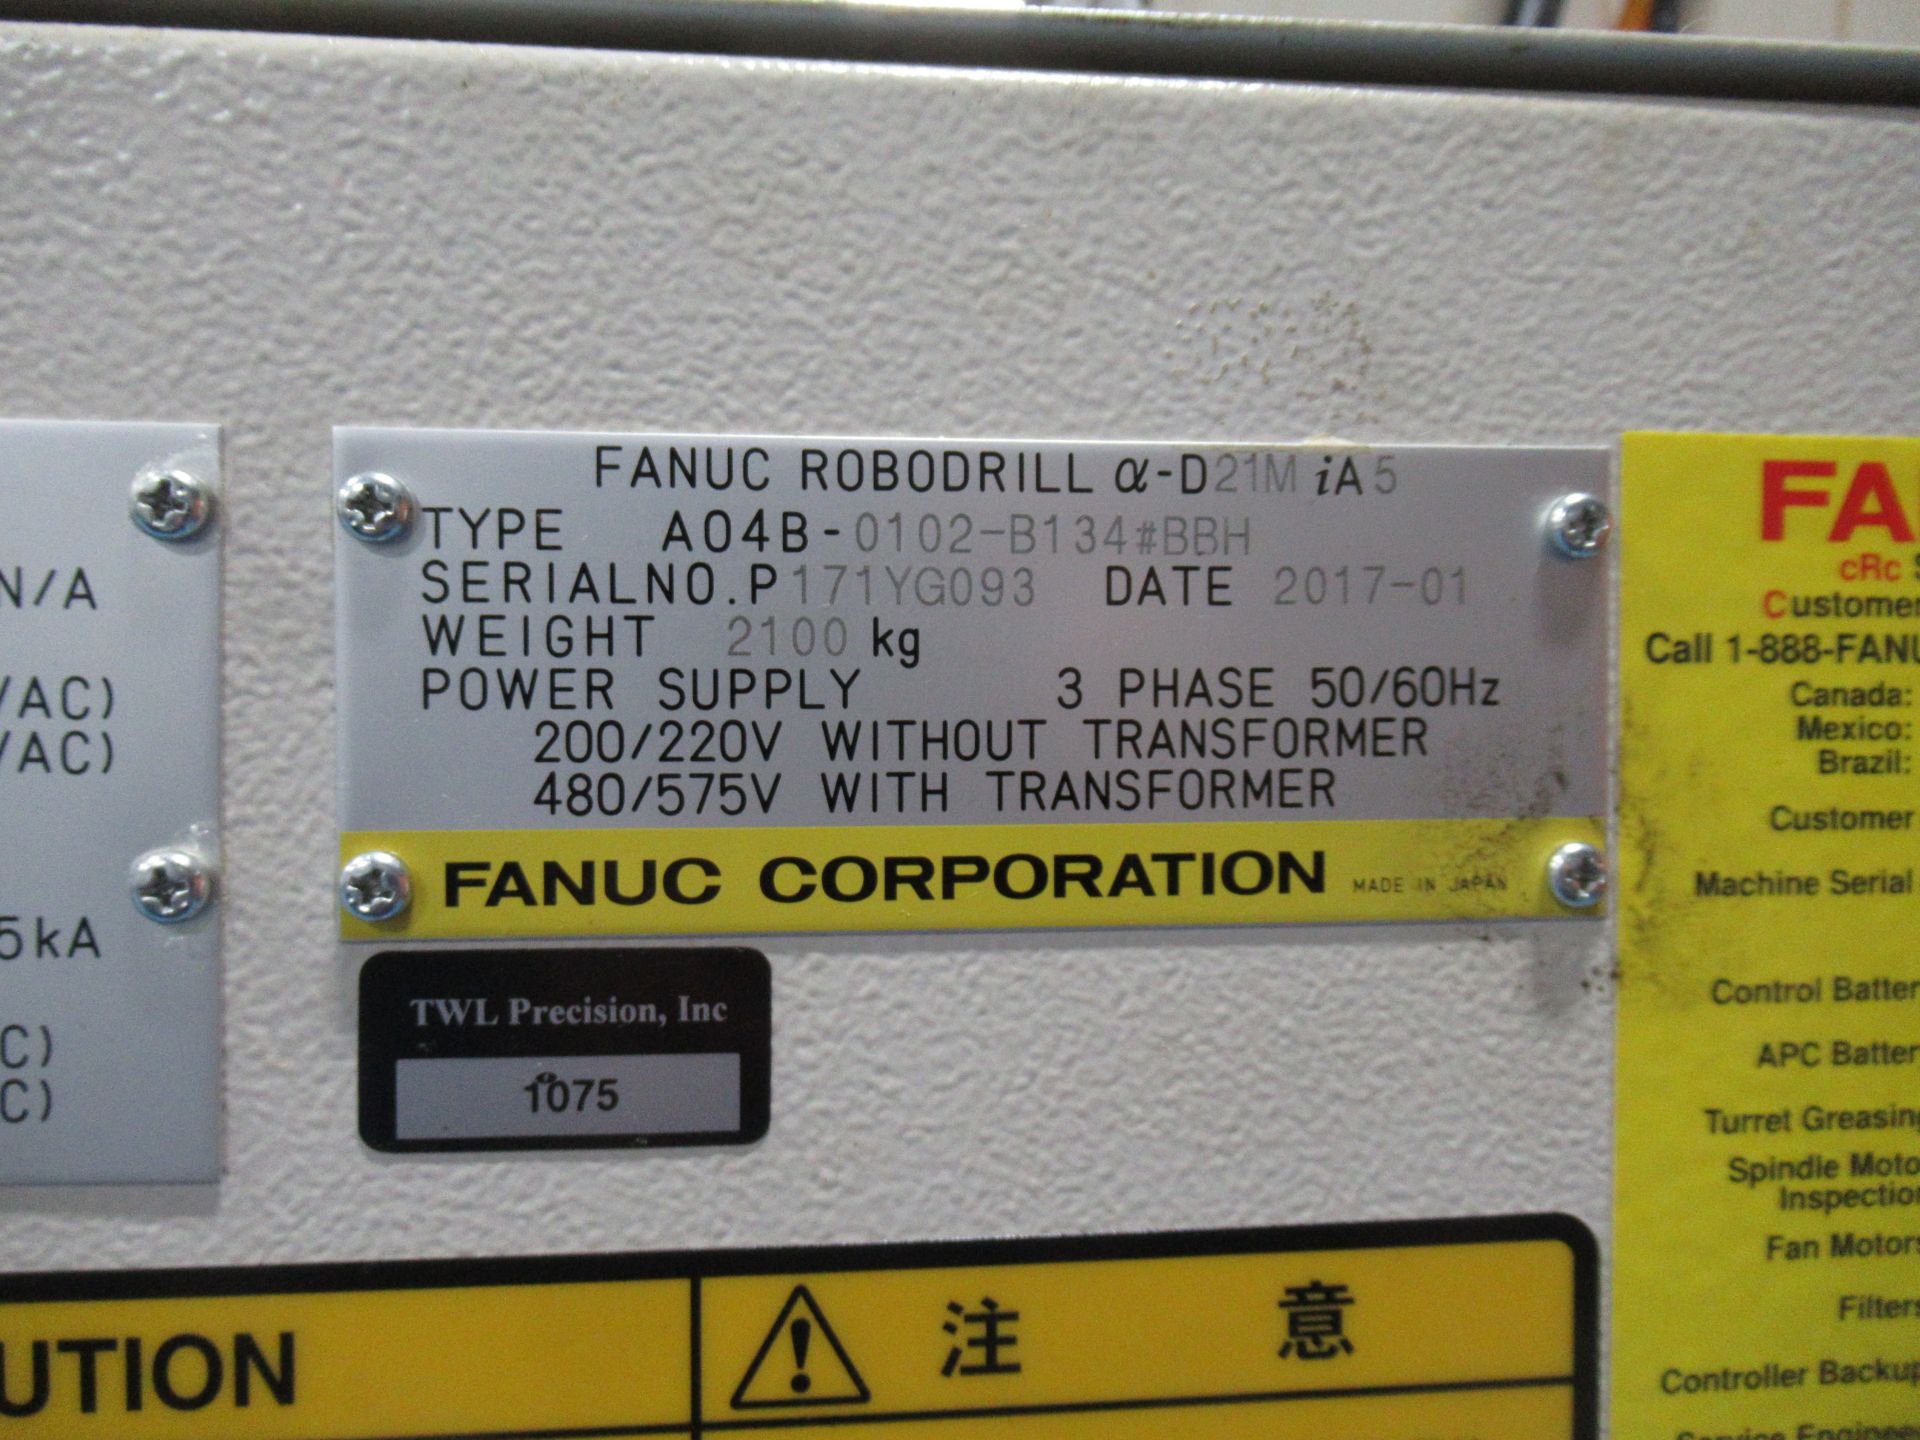 2017 (2) FANUC ROBODRILL α-D21MiA5 “High Power Version” CNC Milling & Drilling Centers - Image 4 of 10